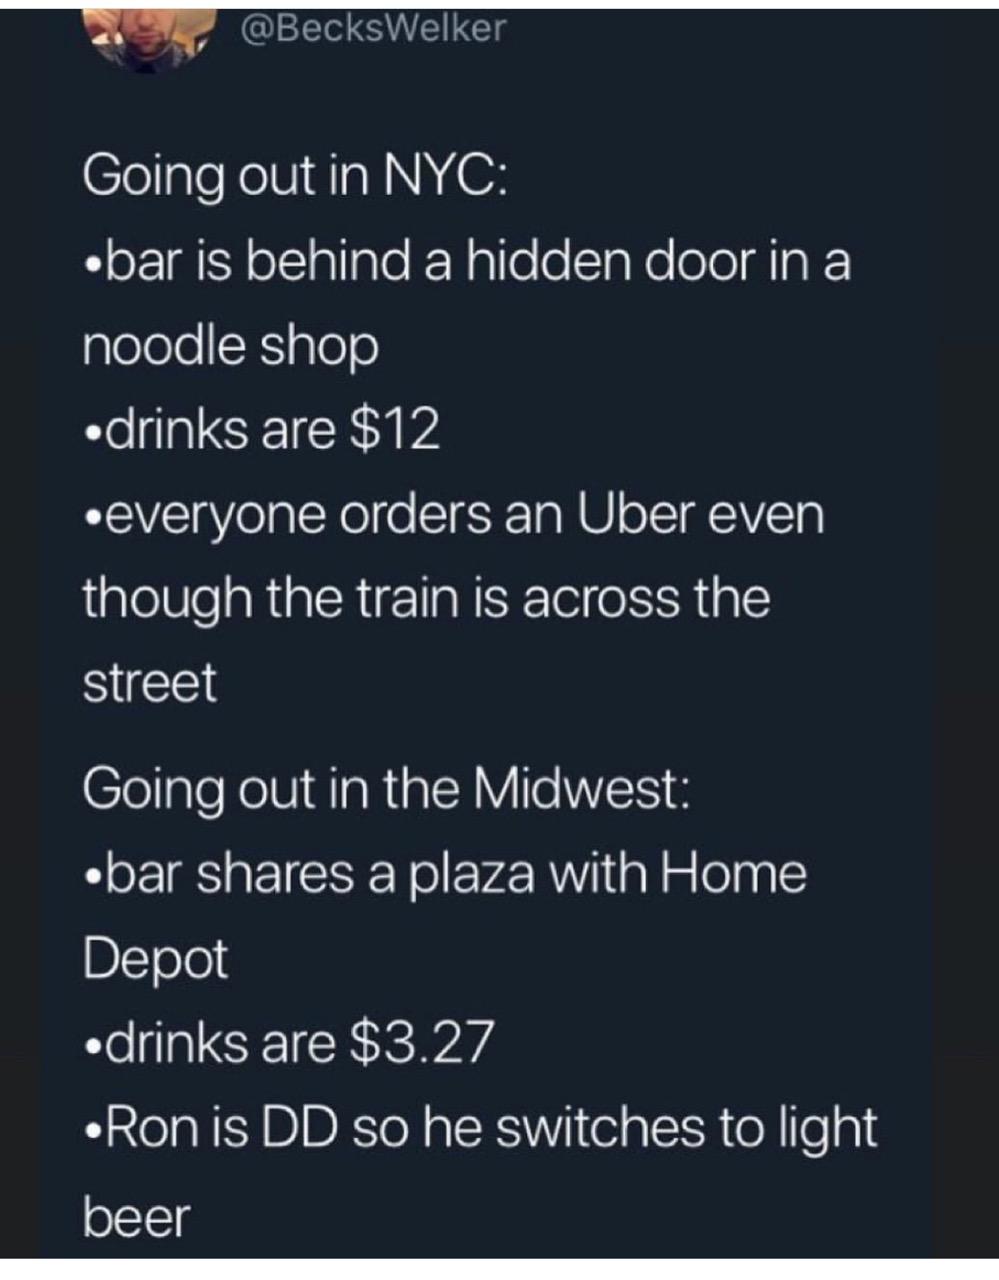 screenshot - Going out in Nyc .bar is behind a hidden door in a noodle shop drinks are $12 everyone orders an Uber even though the train is across the street Going out in the Midwest bar a plaza with Home Depot drinks are $3.27 Ron is Dd so he switches to